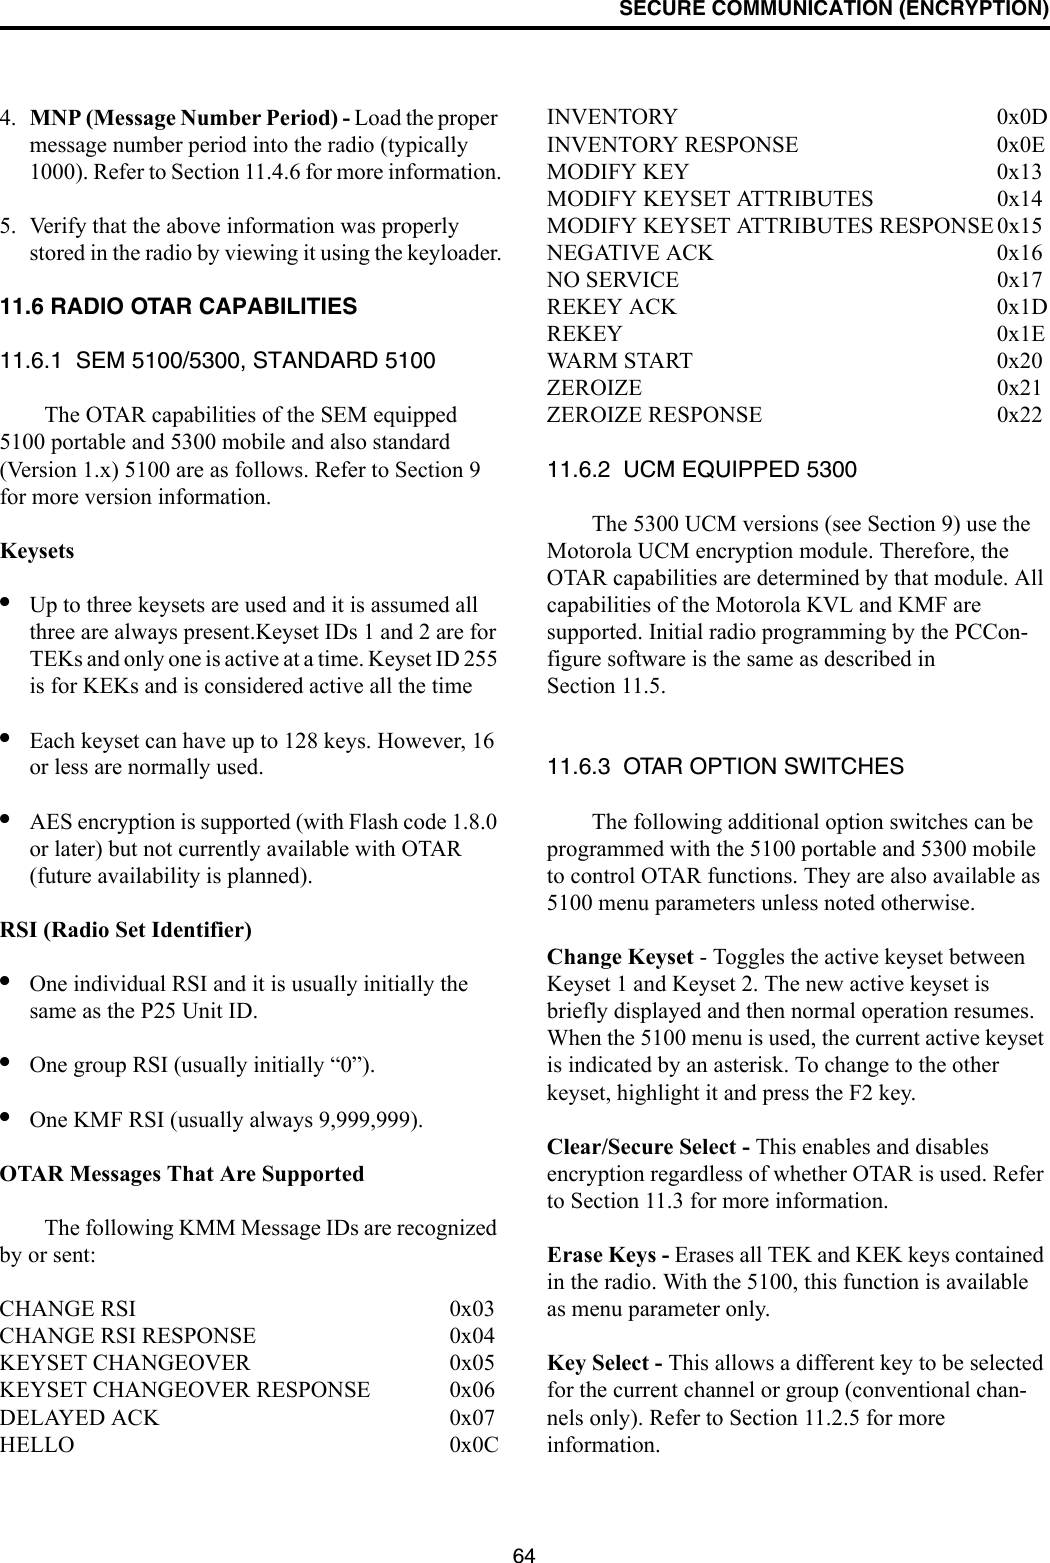 SECURE COMMUNICATION (ENCRYPTION)644. MNP (Message Number Period) - Load the proper message number period into the radio (typically 1000). Refer to Section 11.4.6 for more information.5. Verify that the above information was properly stored in the radio by viewing it using the keyloader.11.6 RADIO OTAR CAPABILITIES11.6.1  SEM 5100/5300, STANDARD 5100The OTAR capabilities of the SEM equipped 5100 portable and 5300 mobile and also standard (Version 1.x) 5100 are as follows. Refer to Section 9 for more version information.Keysets•Up to three keysets are used and it is assumed all three are always present.Keyset IDs 1 and 2 are for TEKs and only one is active at a time. Keyset ID 255 is for KEKs and is considered active all the time•Each keyset can have up to 128 keys. However, 16 or less are normally used. •AES encryption is supported (with Flash code 1.8.0 or later) but not currently available with OTAR (future availability is planned).RSI (Radio Set Identifier)•One individual RSI and it is usually initially the same as the P25 Unit ID.•One group RSI (usually initially “0”).•One KMF RSI (usually always 9,999,999).OTAR Messages That Are SupportedThe following KMM Message IDs are recognized by or sent:CHANGE RSI 0x03CHANGE RSI RESPONSE 0x04KEYSET CHANGEOVER 0x05KEYSET CHANGEOVER RESPONSE 0x06DELAYED ACK 0x07HELLO 0x0CINVENTORY 0x0DINVENTORY RESPONSE 0x0EMODIFY KEY 0x13MODIFY KEYSET ATTRIBUTES 0x14MODIFY KEYSET ATTRIBUTES RESPONSE 0x15NEGATIVE ACK 0x16NO SERVICE 0x17REKEY ACK 0x1DREKEY 0x1EWAR M  S TA RT 0x 2 0ZEROIZE 0x21ZEROIZE RESPONSE 0x2211.6.2  UCM EQUIPPED 5300The 5300 UCM versions (see Section 9) use the Motorola UCM encryption module. Therefore, the OTAR capabilities are determined by that module. All capabilities of the Motorola KVL and KMF are supported. Initial radio programming by the PCCon-figure software is the same as described in Section 11.5. 11.6.3  OTAR OPTION SWITCHESThe following additional option switches can be programmed with the 5100 portable and 5300 mobile to control OTAR functions. They are also available as 5100 menu parameters unless noted otherwise.Change Keyset - Toggles the active keyset between Keyset 1 and Keyset 2. The new active keyset is briefly displayed and then normal operation resumes. When the 5100 menu is used, the current active keyset is indicated by an asterisk. To change to the other keyset, highlight it and press the F2 key.Clear/Secure Select - This enables and disables encryption regardless of whether OTAR is used. Refer to Section 11.3 for more information.Erase Keys - Erases all TEK and KEK keys contained in the radio. With the 5100, this function is available as menu parameter only.Key Select - This allows a different key to be selected for the current channel or group (conventional chan-nels only). Refer to Section 11.2.5 for more information.